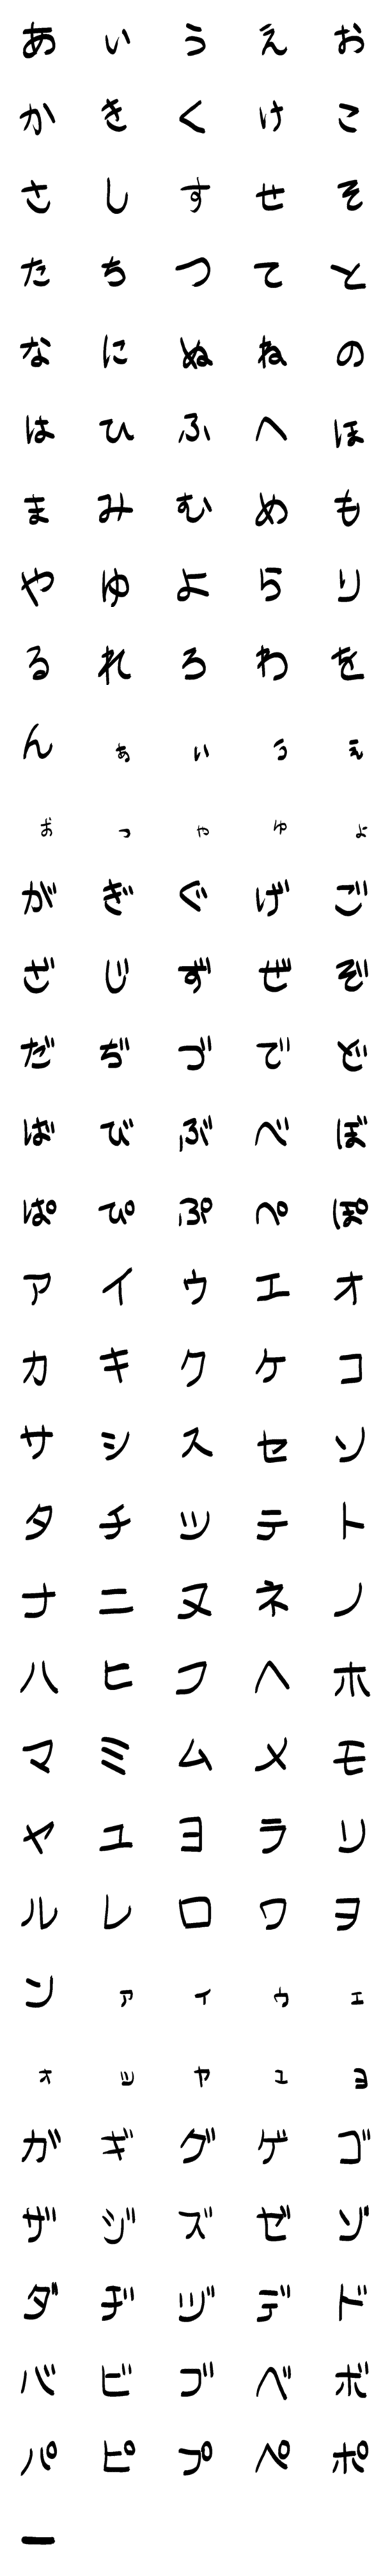 [LINE絵文字]へたくそなじの画像一覧